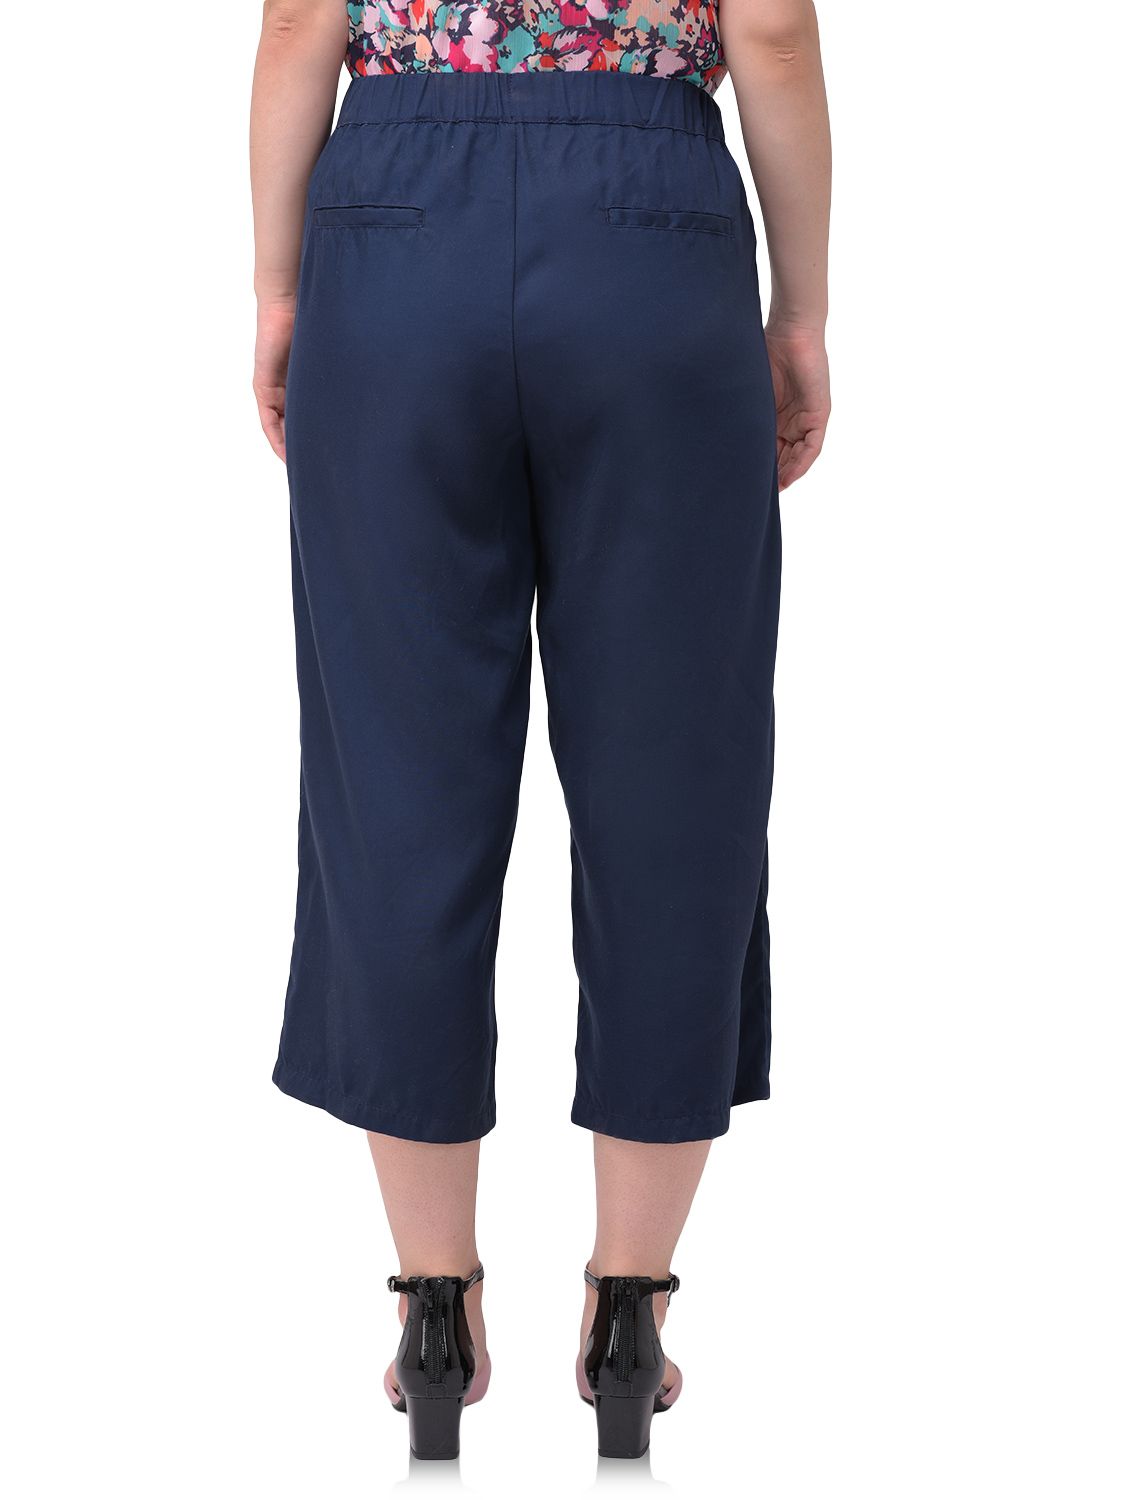 Navy culottes for women